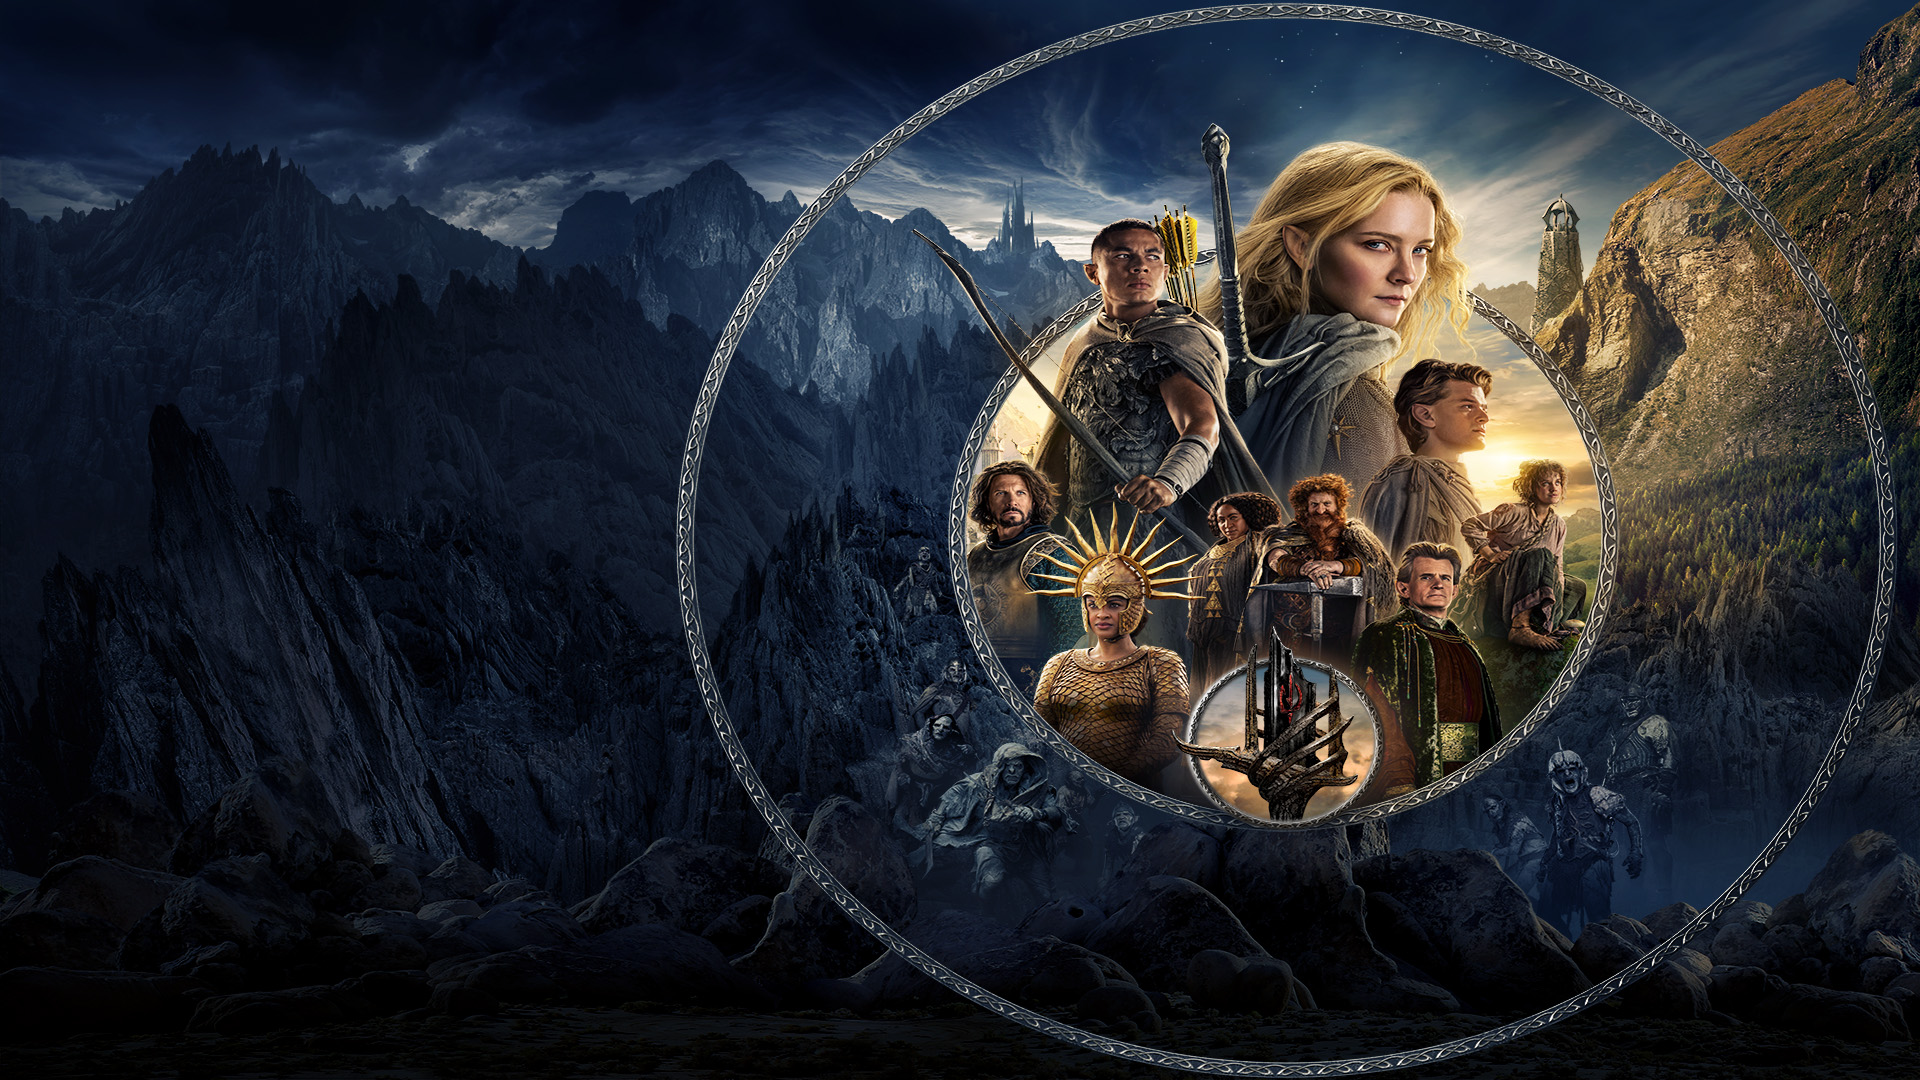 The Lord of the Rings: The Rings of Power news and updates